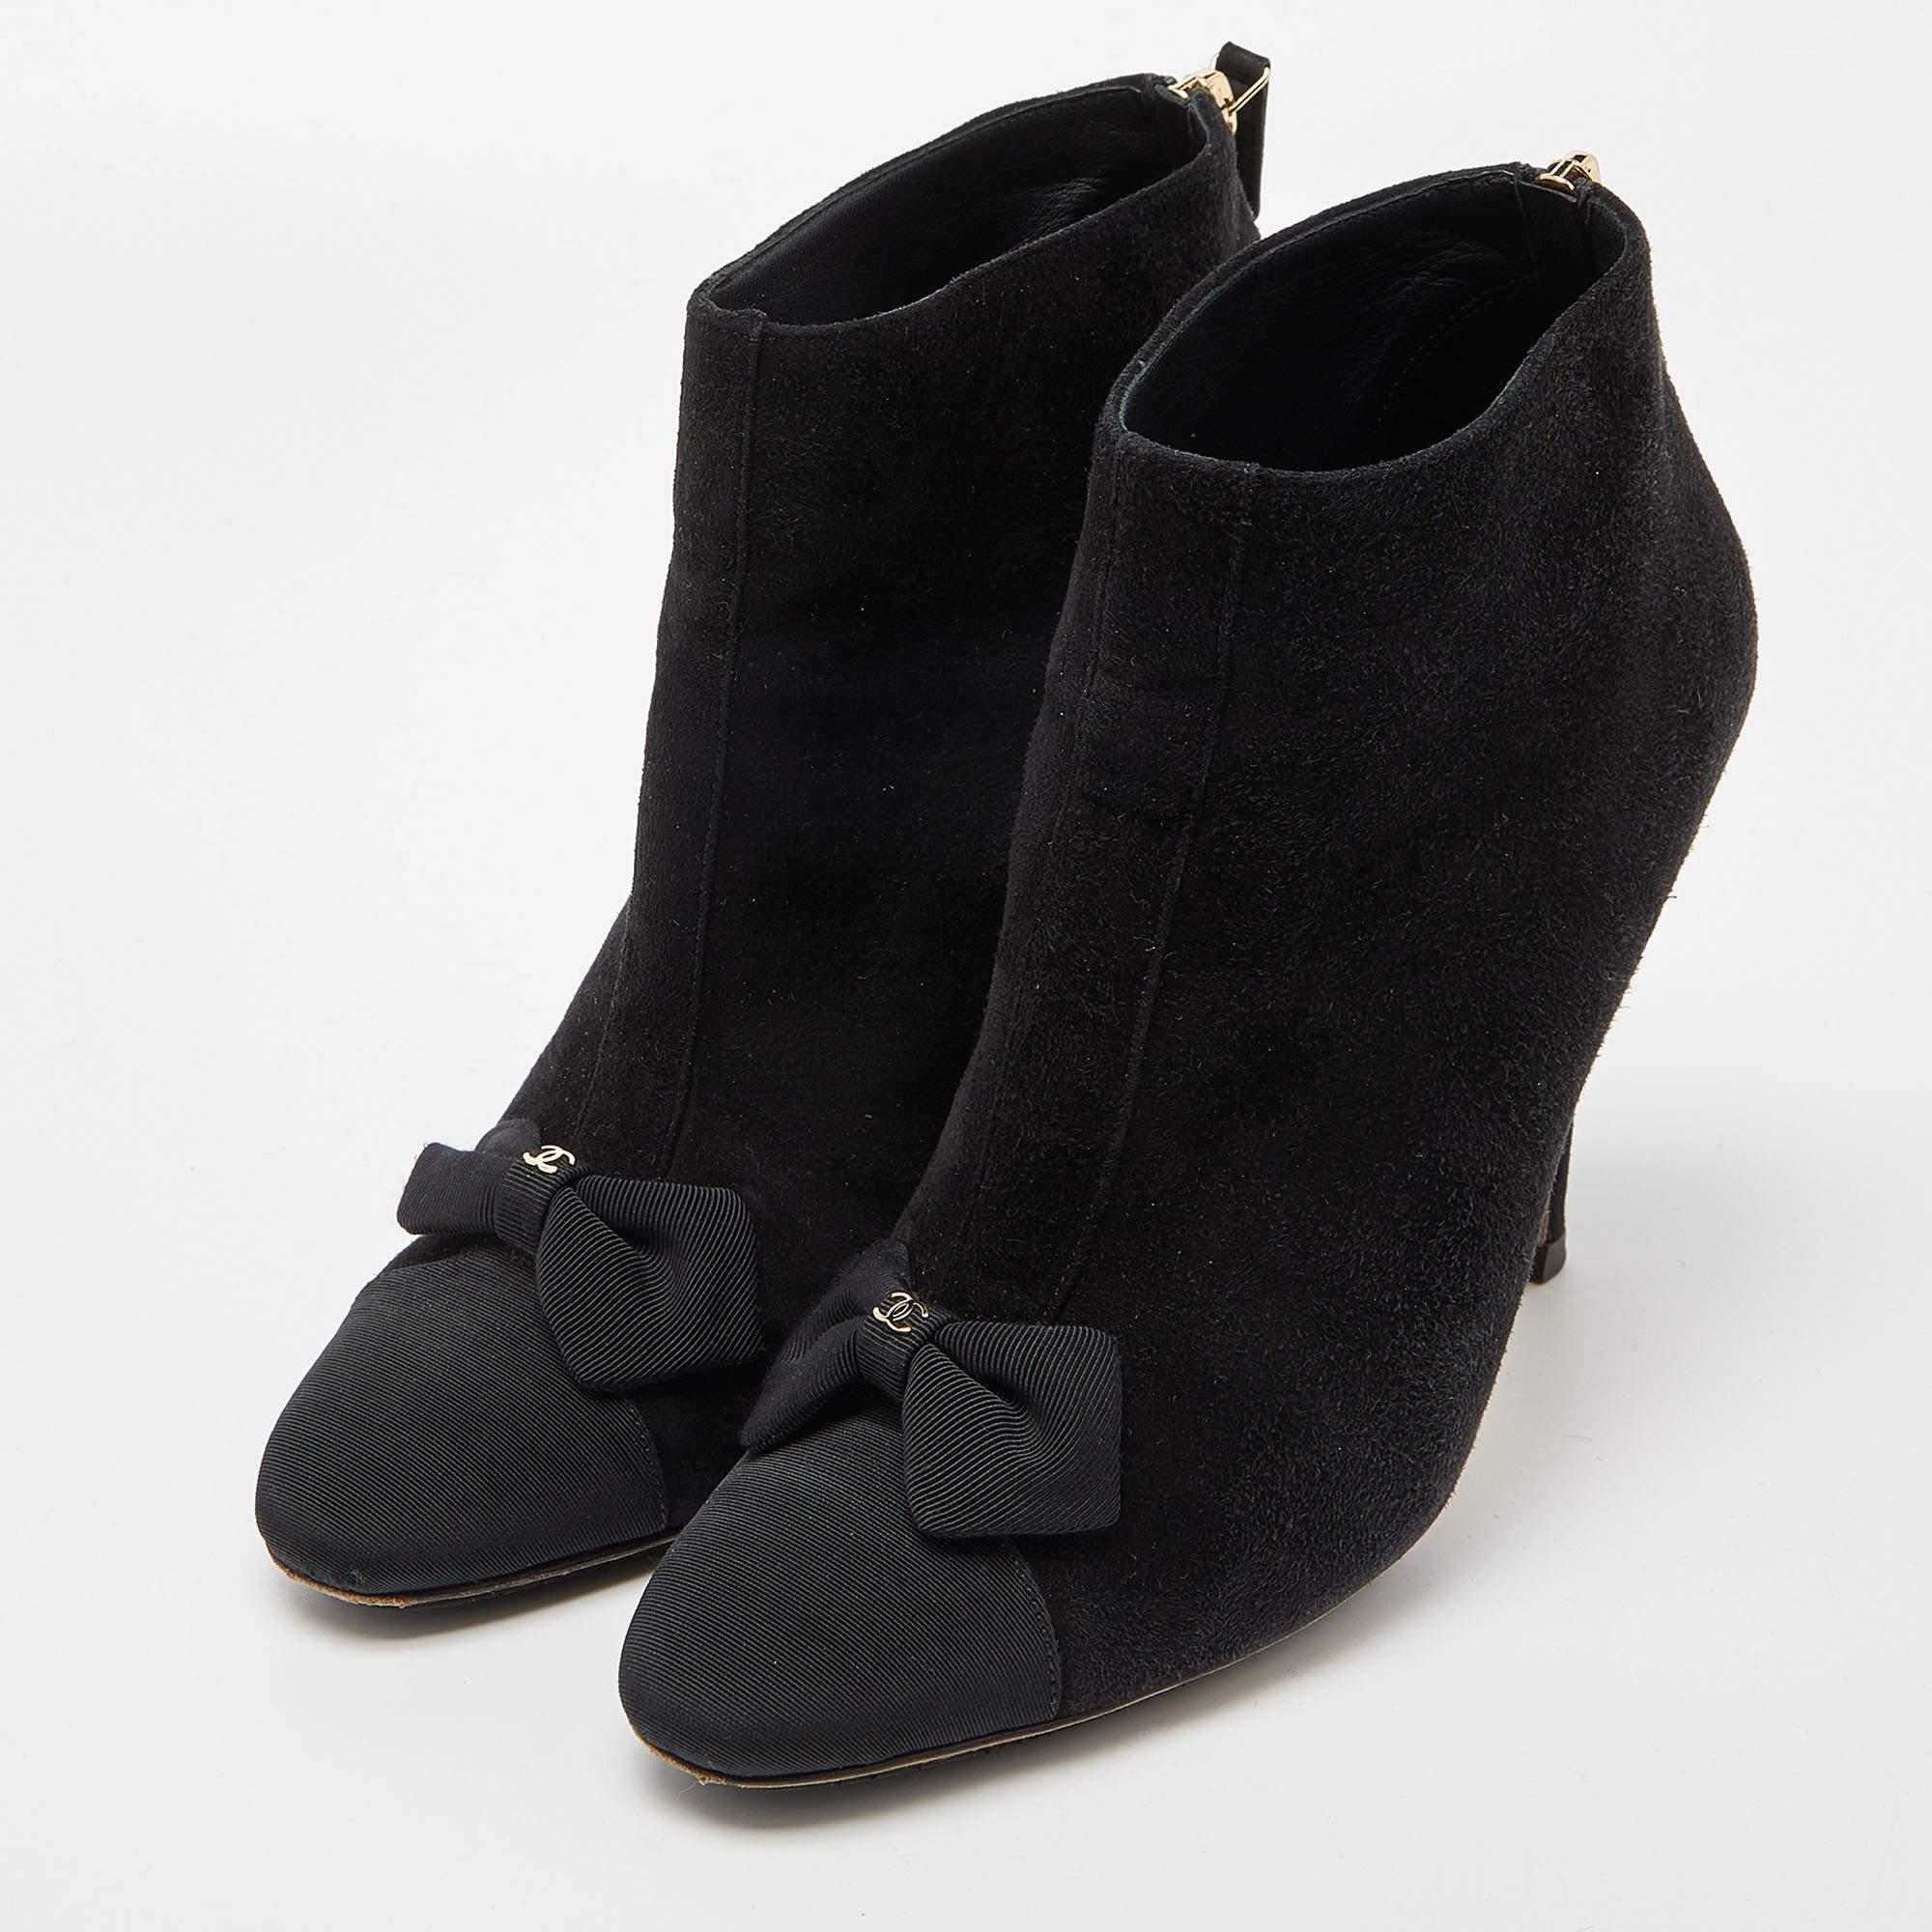 Let your latest shoe addition be this fabulous pair of ankle boots from Chanel. The black boots are crafted from suede and feature canvas cap toes, 11 cm heels, and bow details.